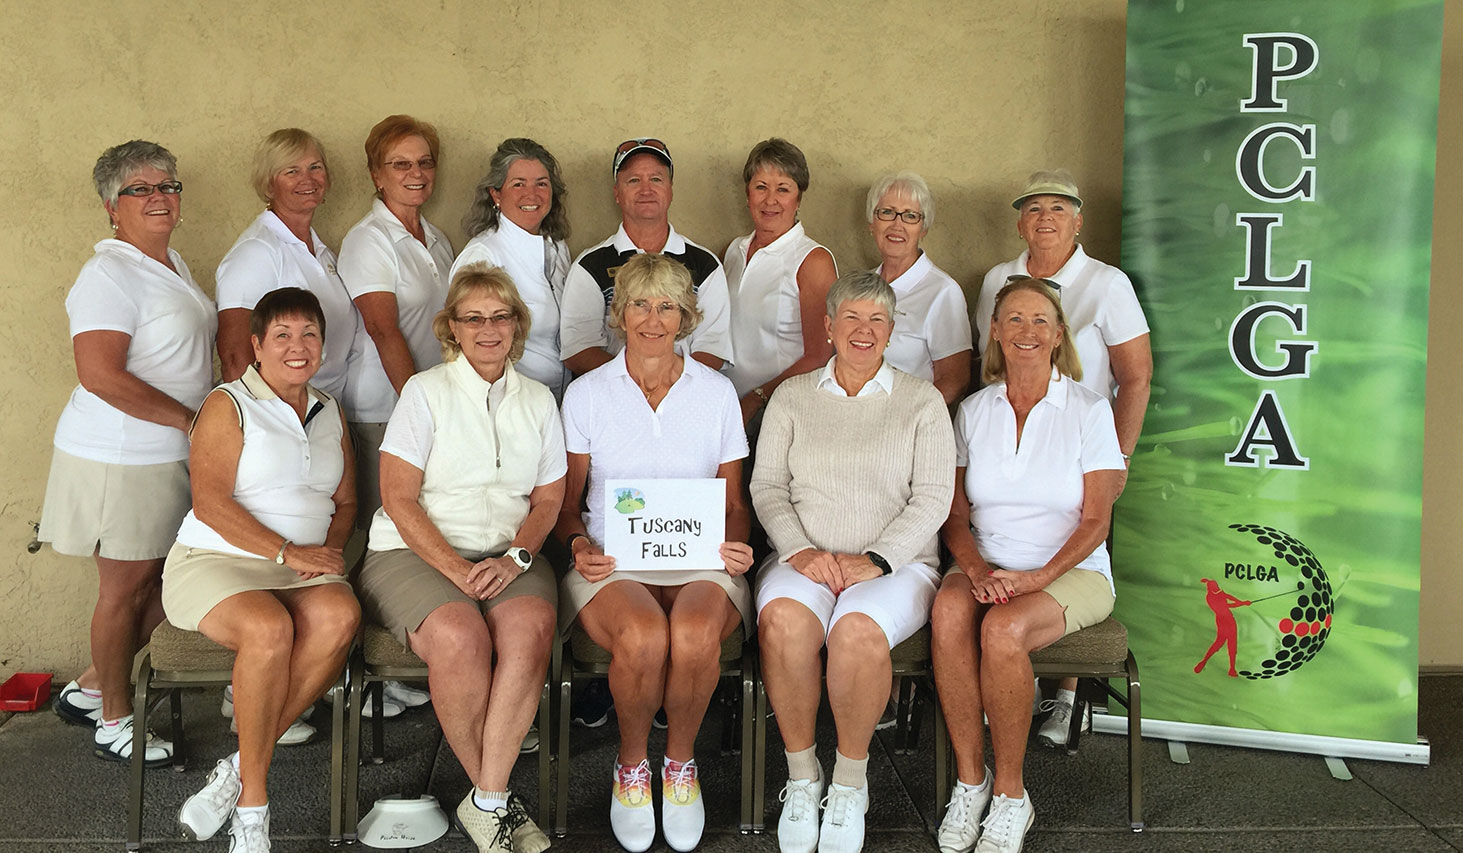 Tuscany Falls Team, back row, left to right: Jean Ostroga, Donnie Meyers, Chris Cook, Ellen Enright, Dave Vader, Sue Abercrombie, Barb Chilton, Suzan Simons; front row: Ellen Stergulz, Kathleen Carney, Claudia Tiger, Sue Harrison, Linda Thompson